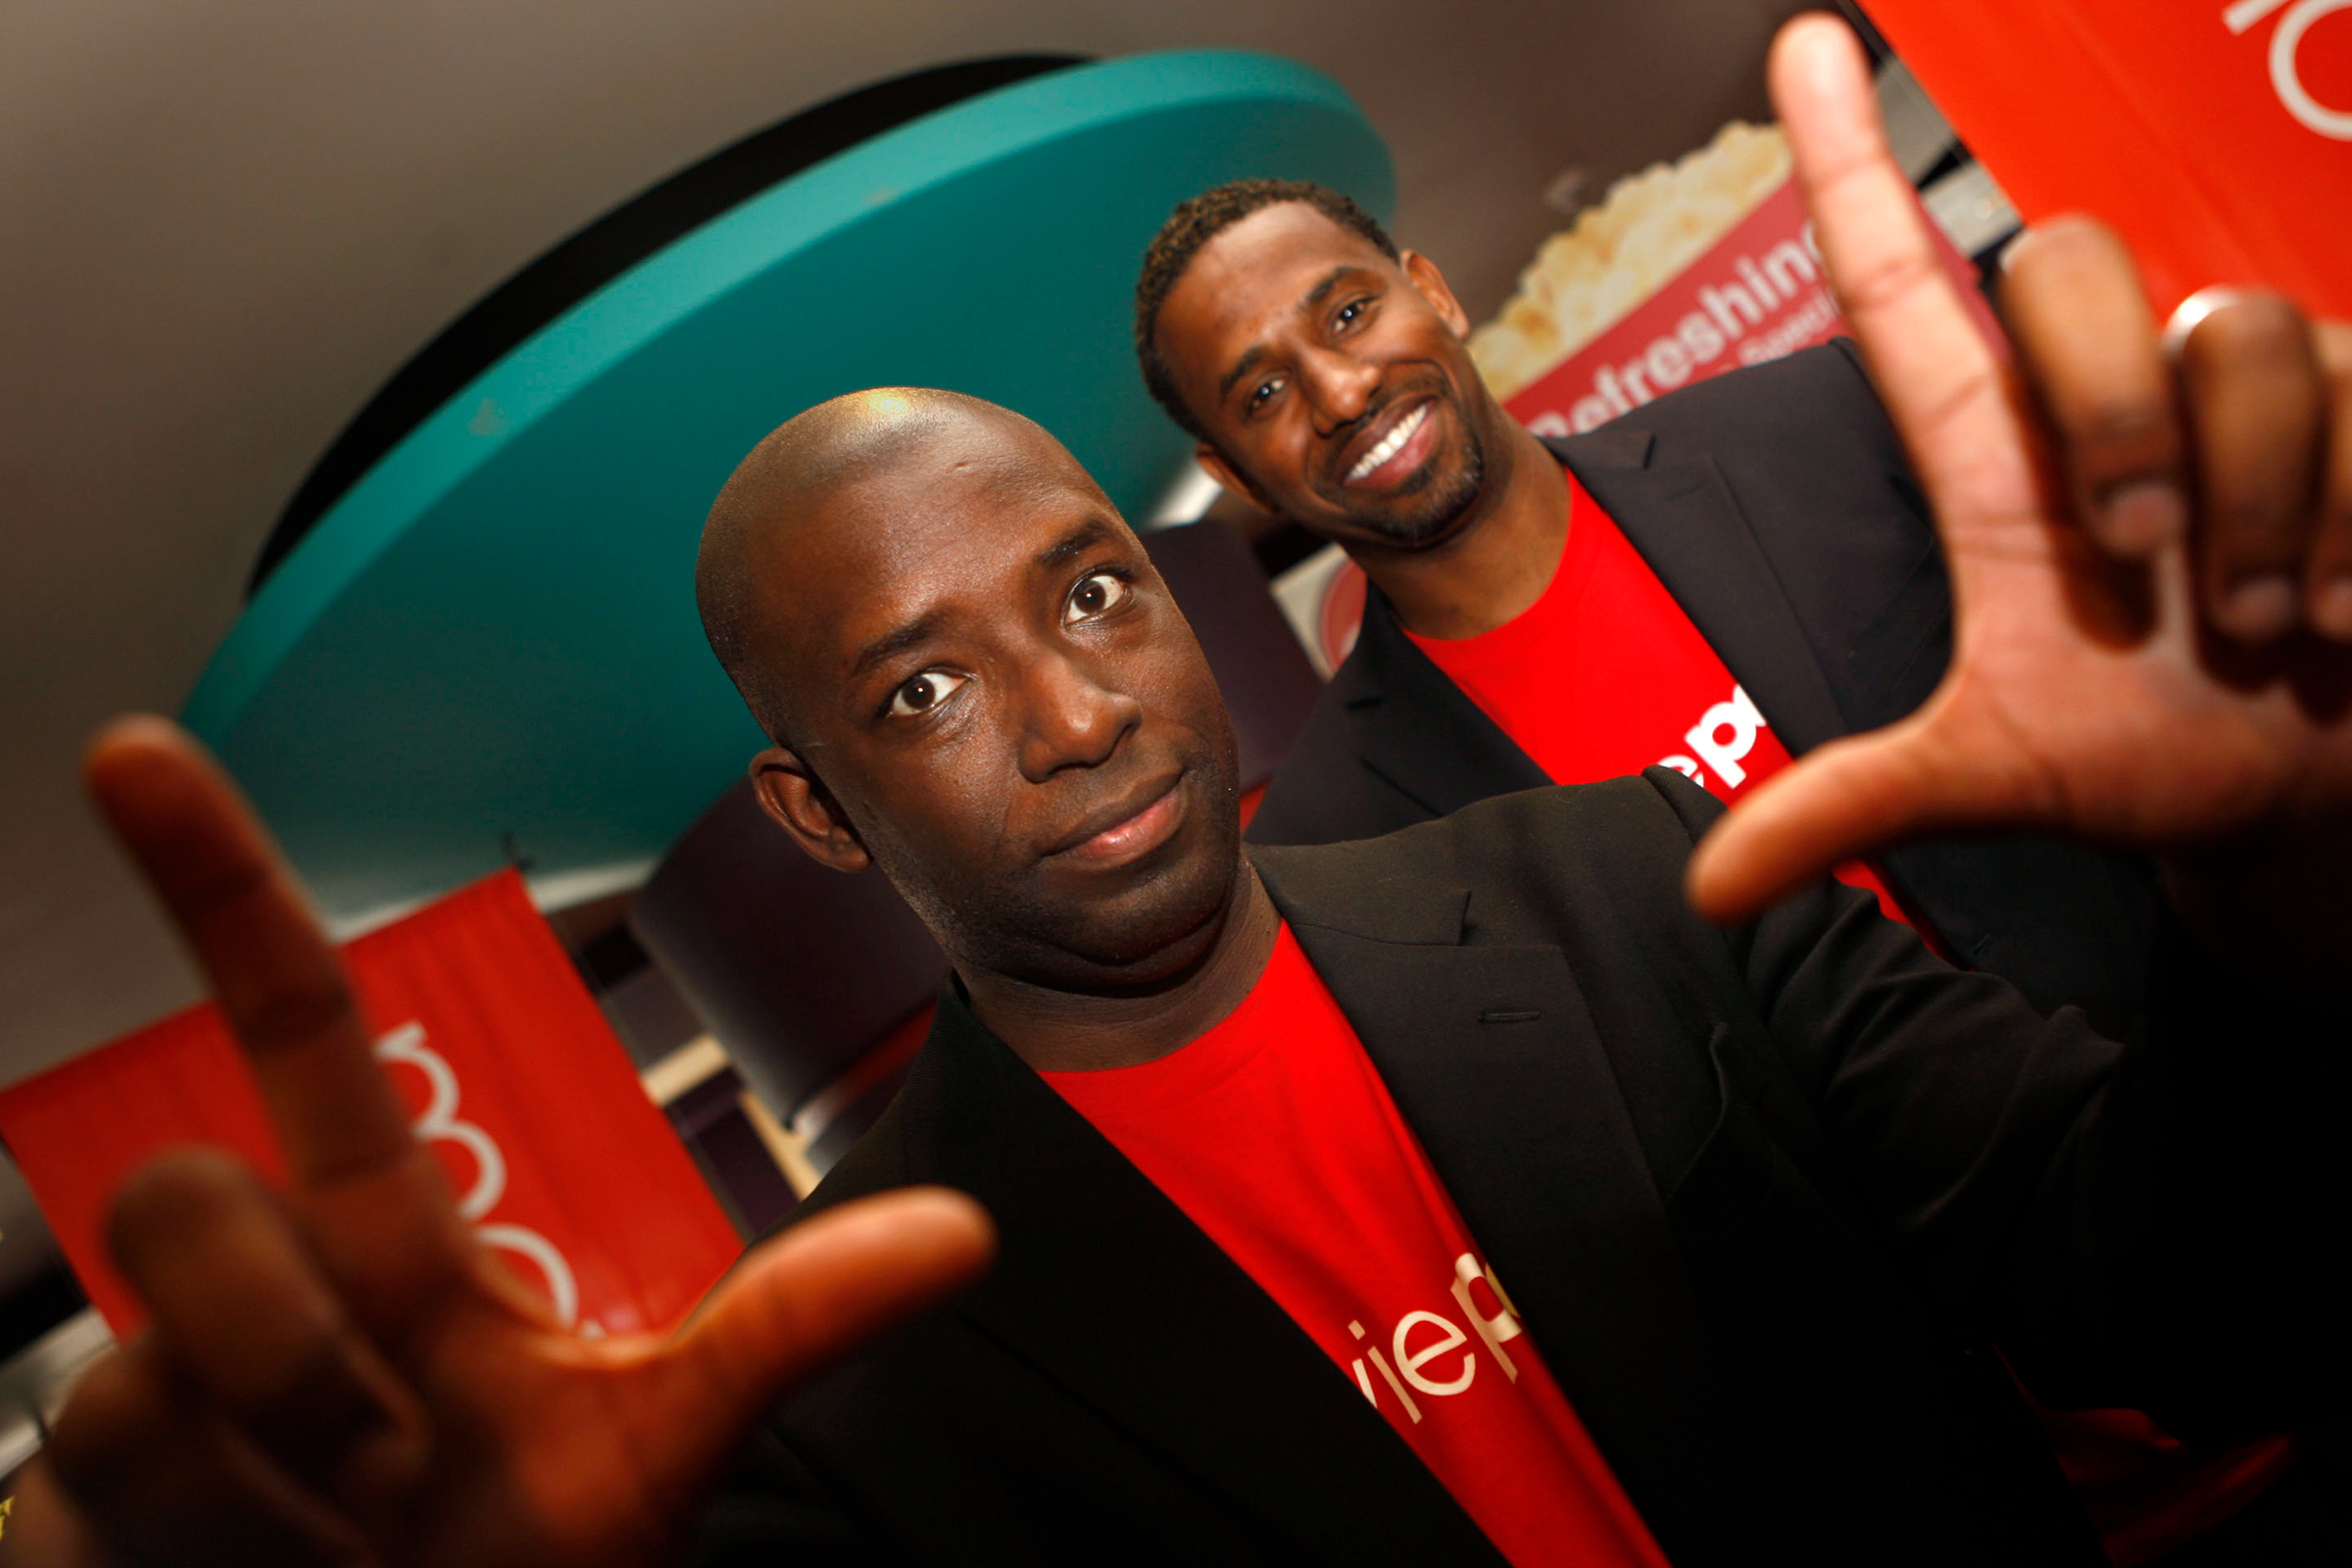 MoviePass co-founders Stacy Spikes, left, and Hamet Watt at AMC in San Francisco, Calif., on January 29, 2011. (Liz Hafalia—The San Francisco Chronicle/Getty Images)